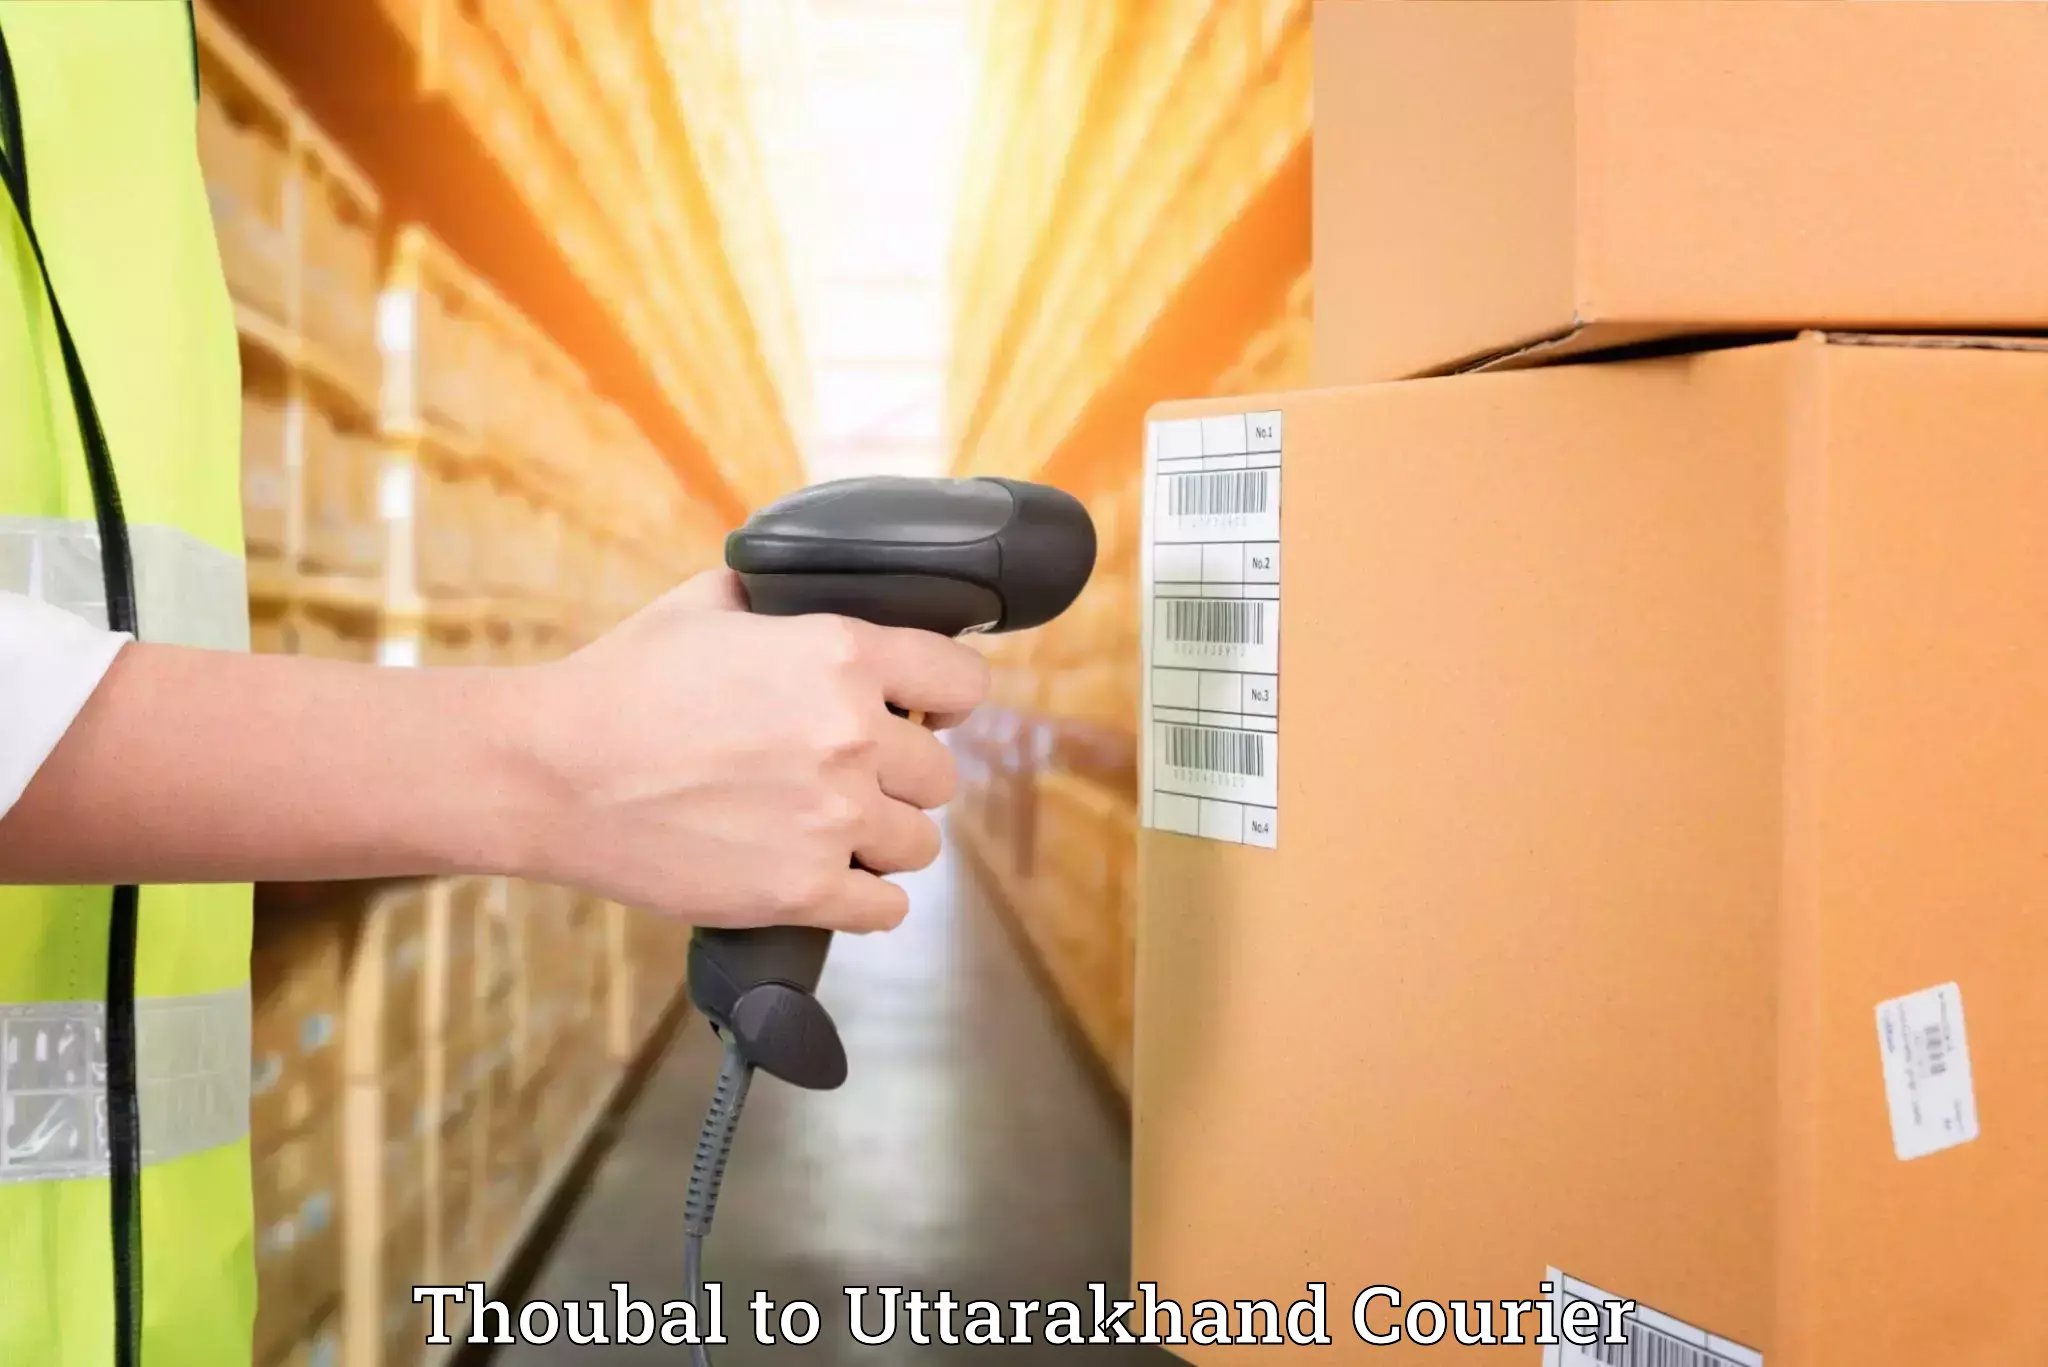 Professional moving company Thoubal to Roorkee